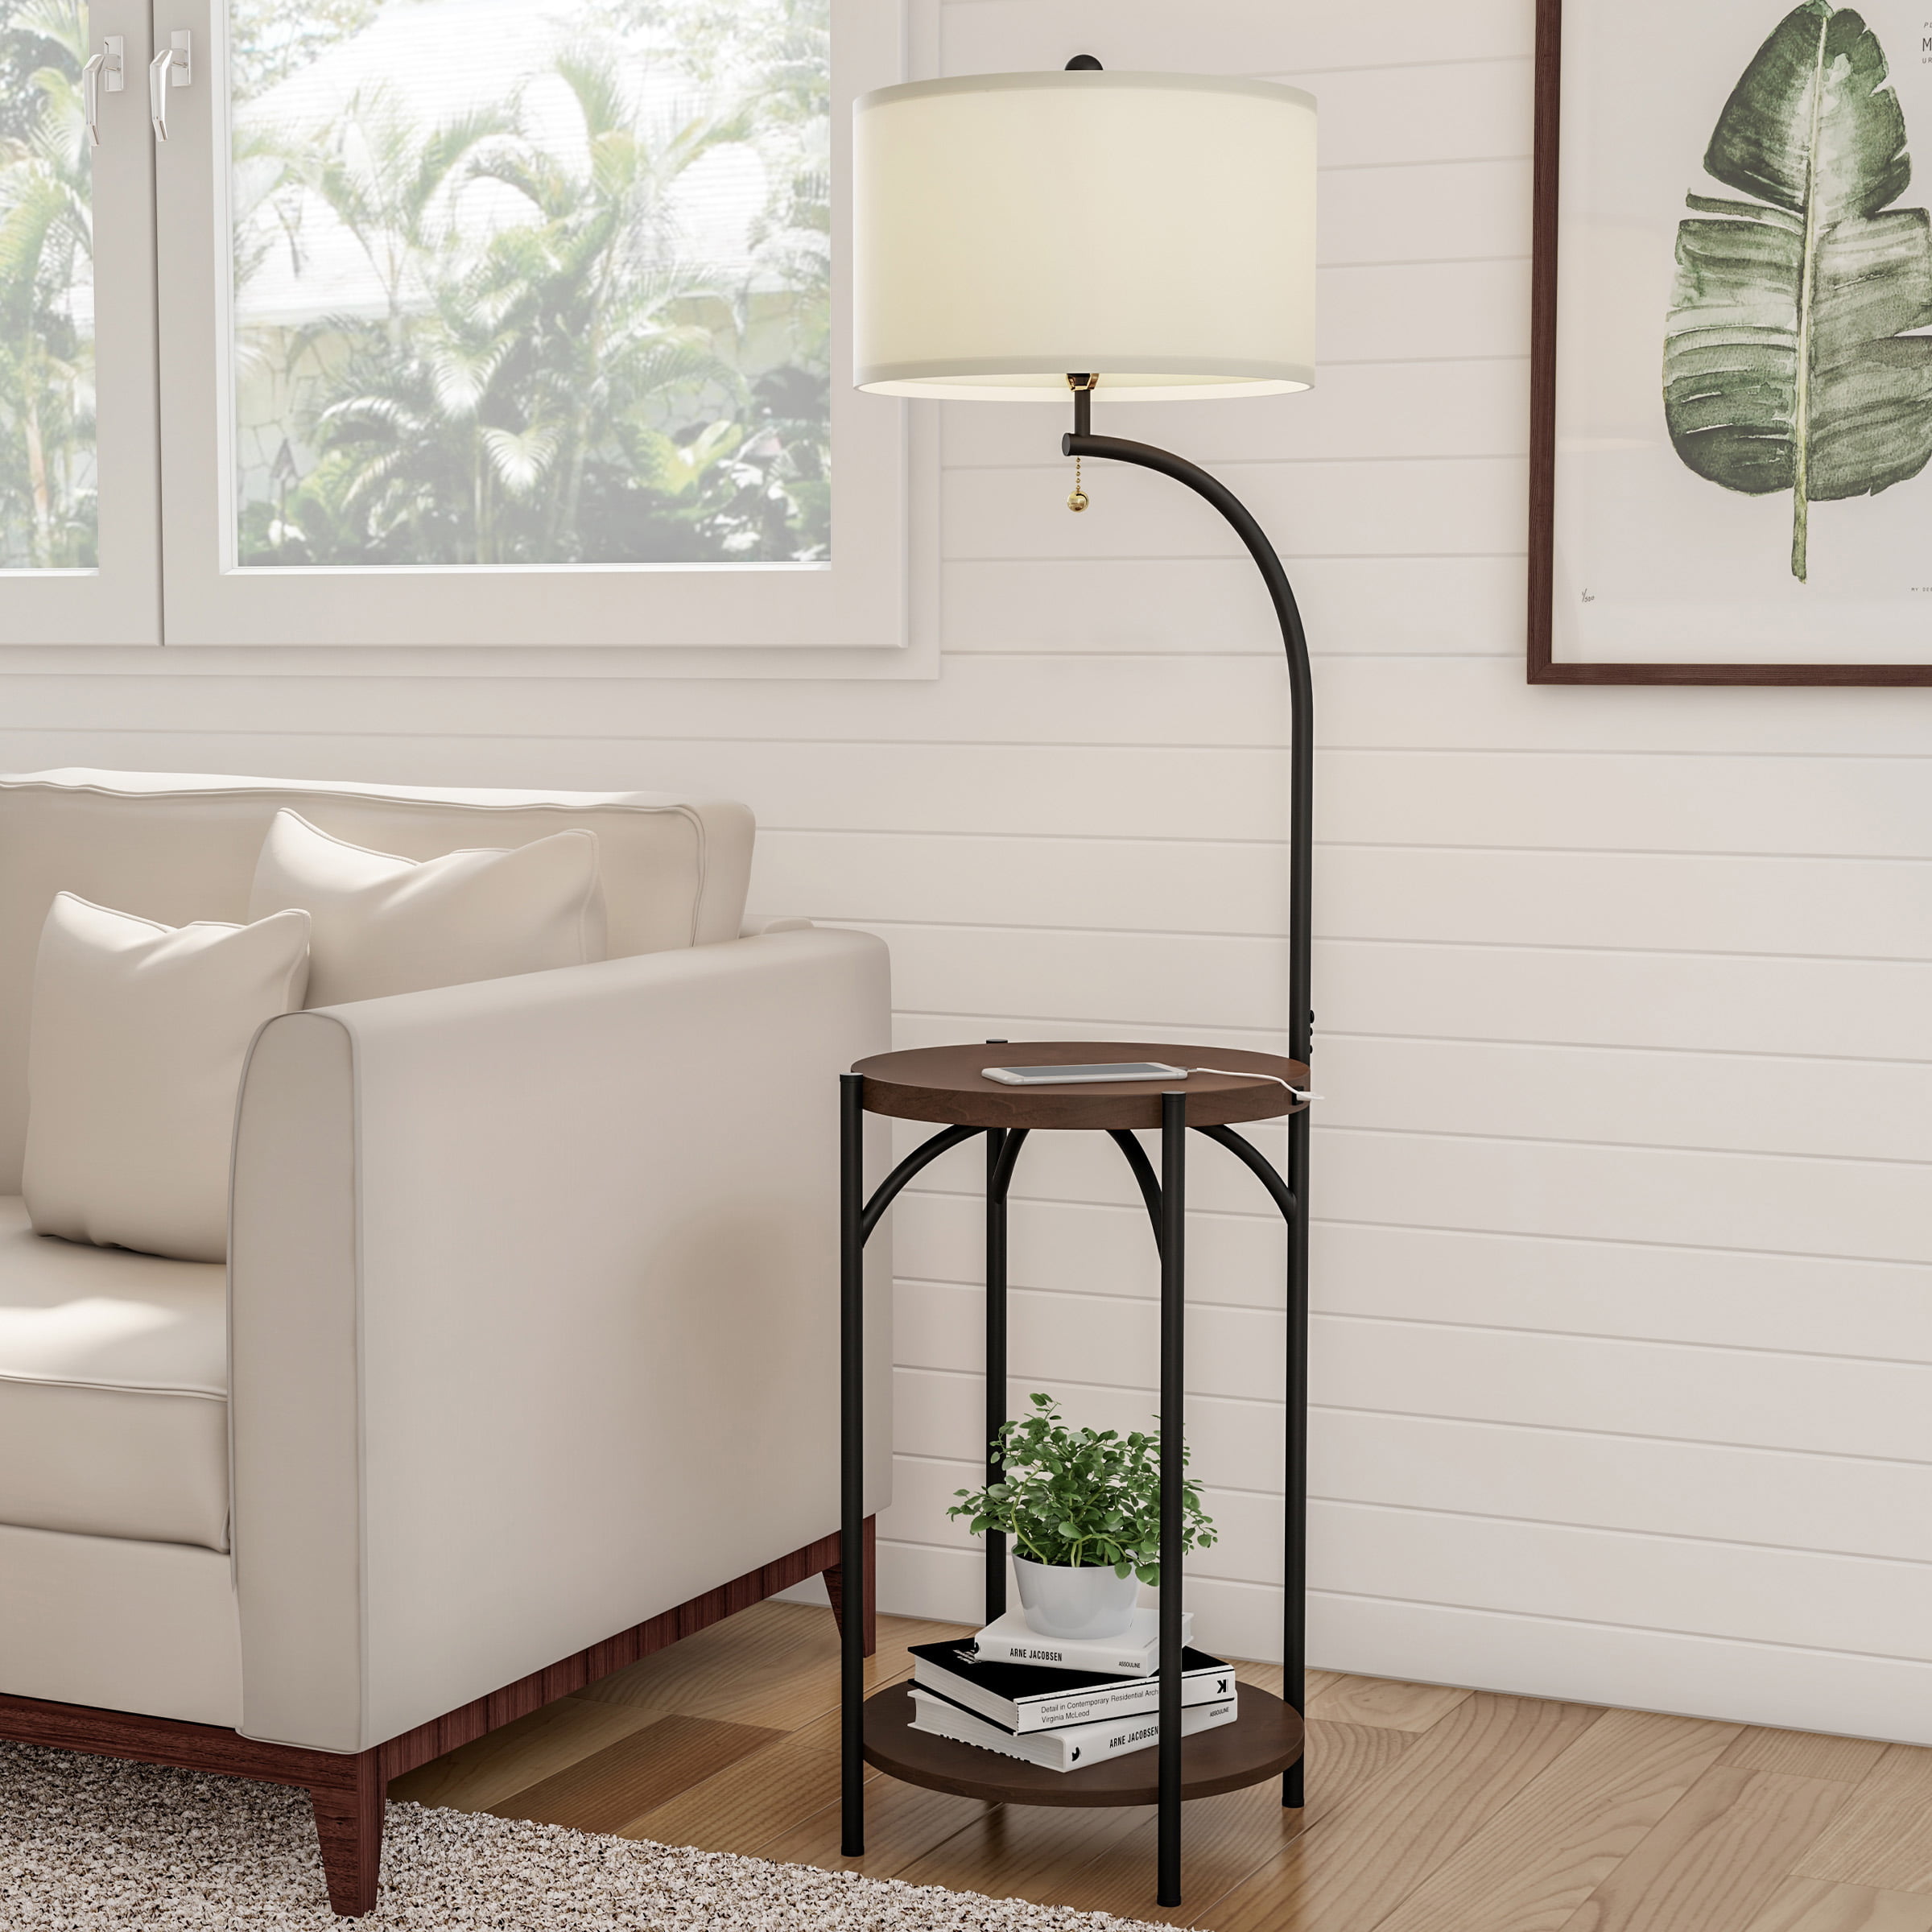 Floor Lamp End Table Modern Rustic, How Tall Should A Lamp Be On An End Table